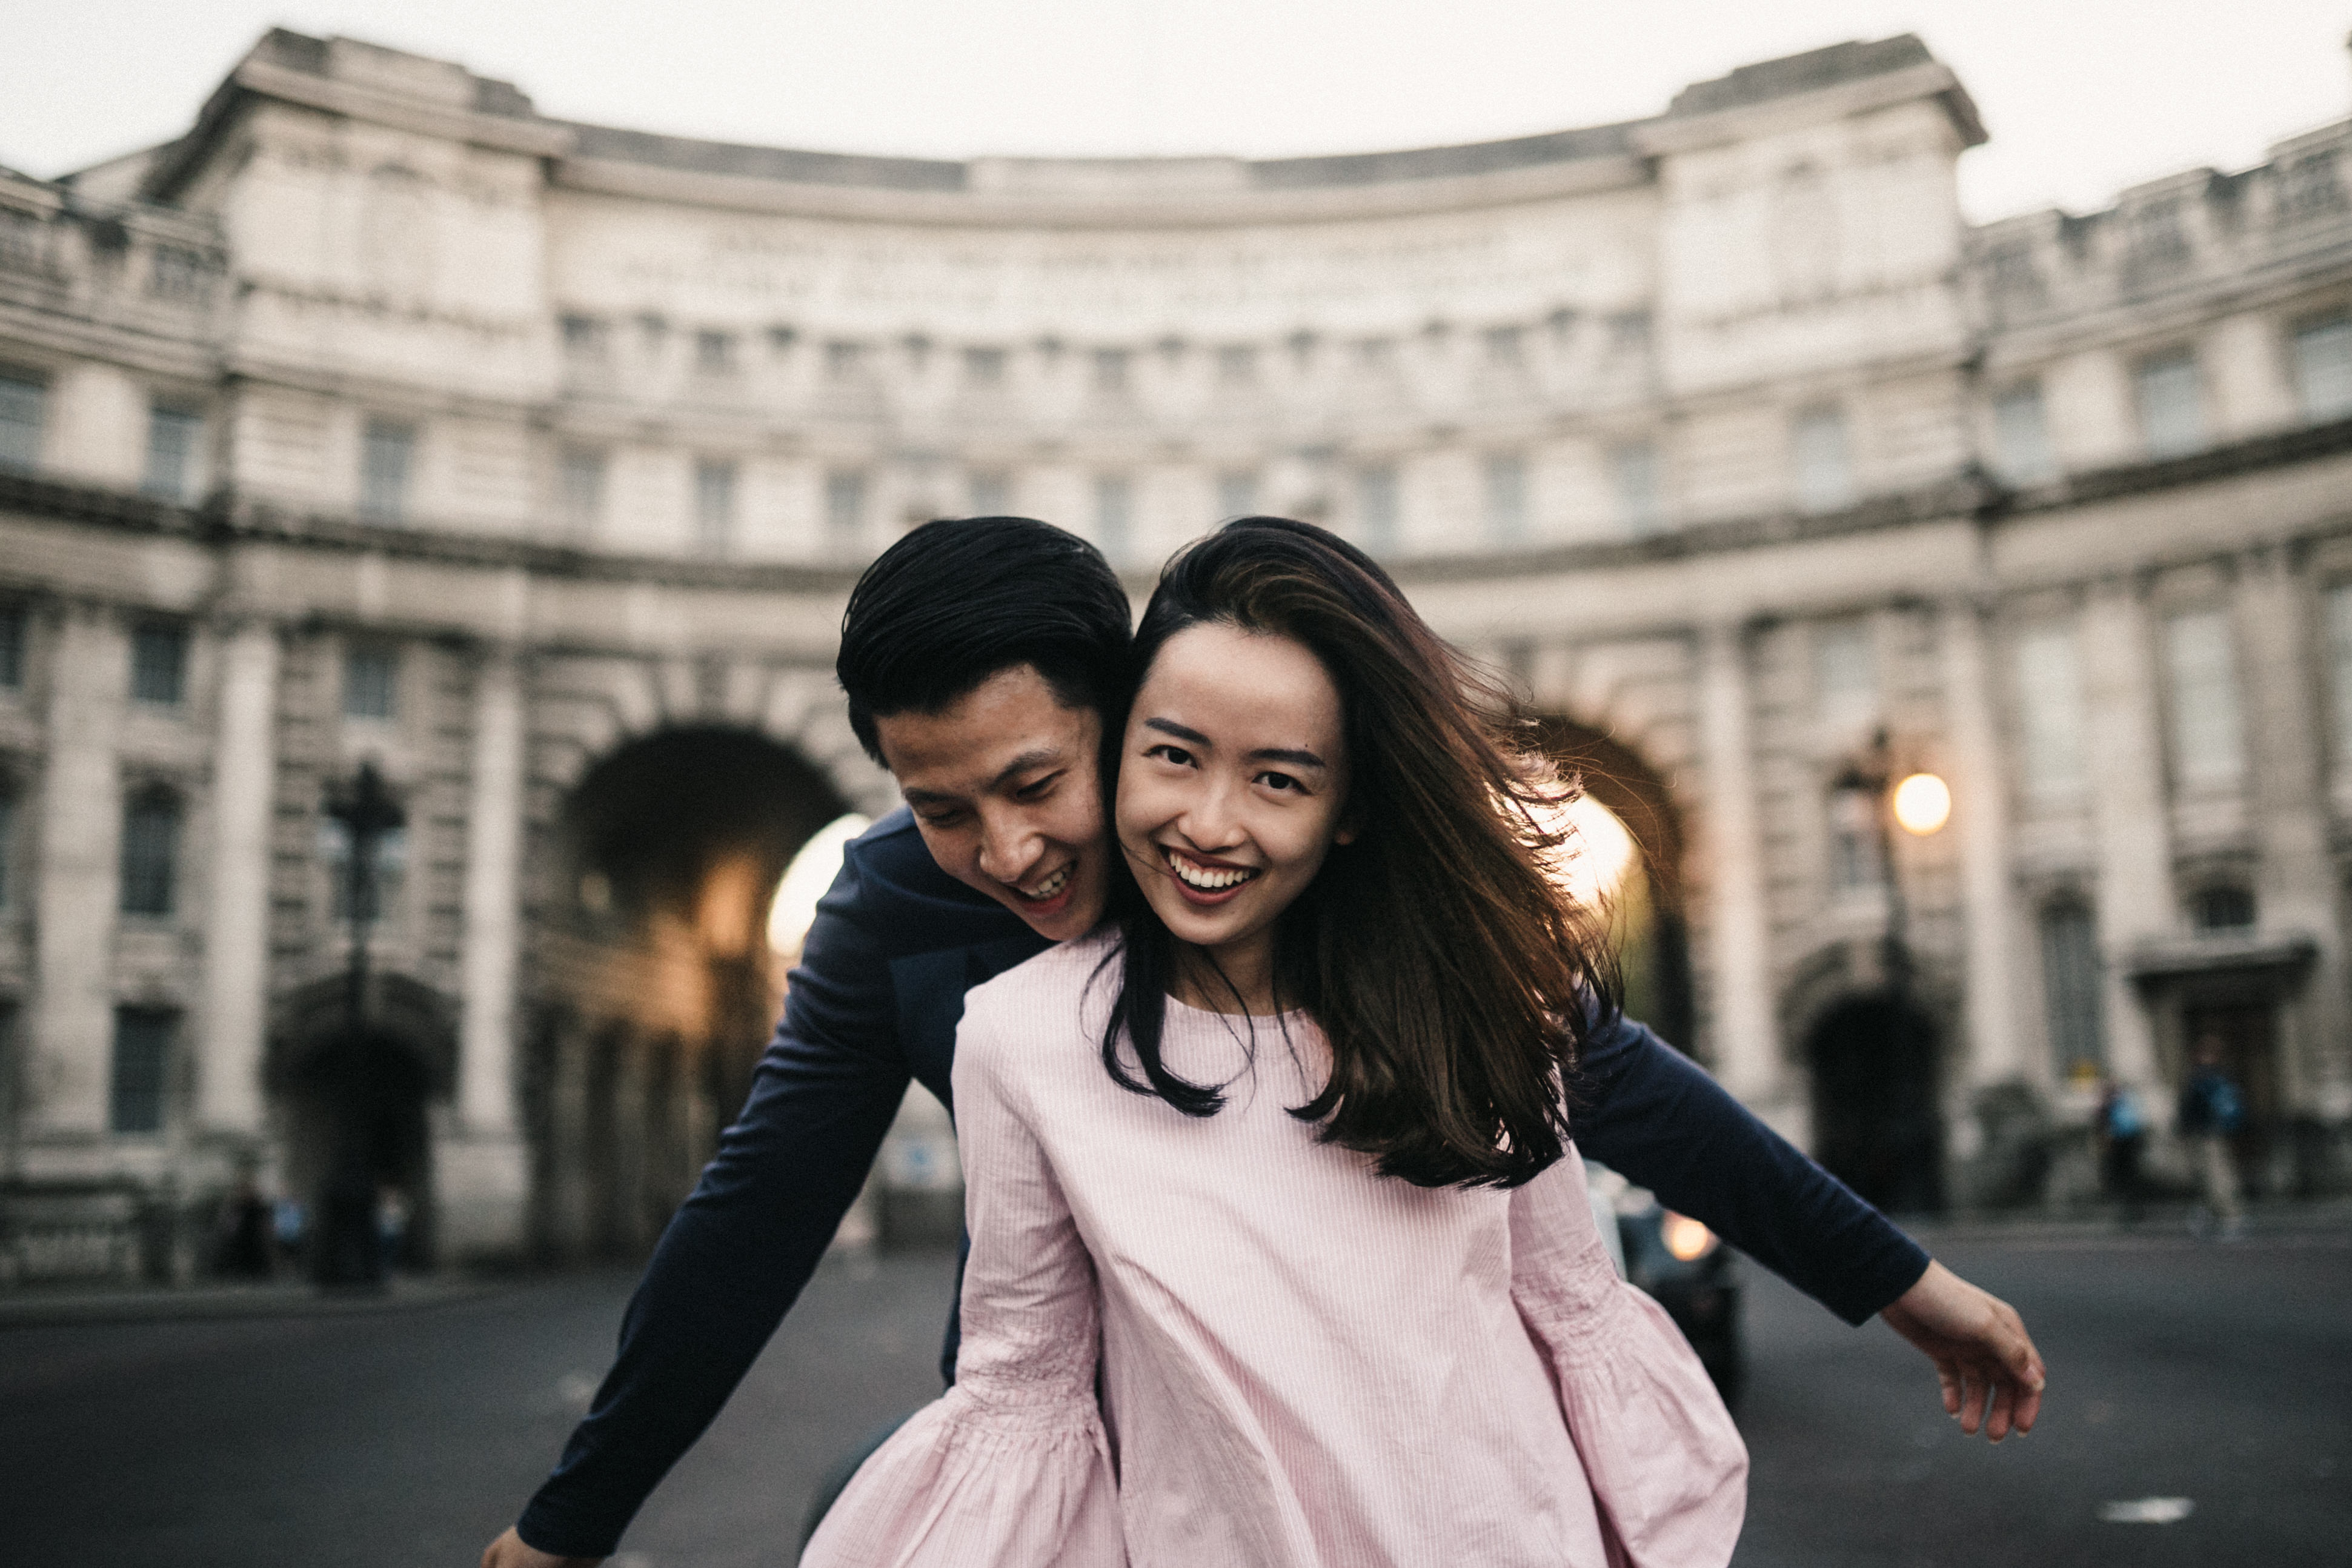 FUN ENGAGEMENT SHOOT IDEAS IN LONDON WESMINSTER SOHO AND SOUTH BANK BIG BEN